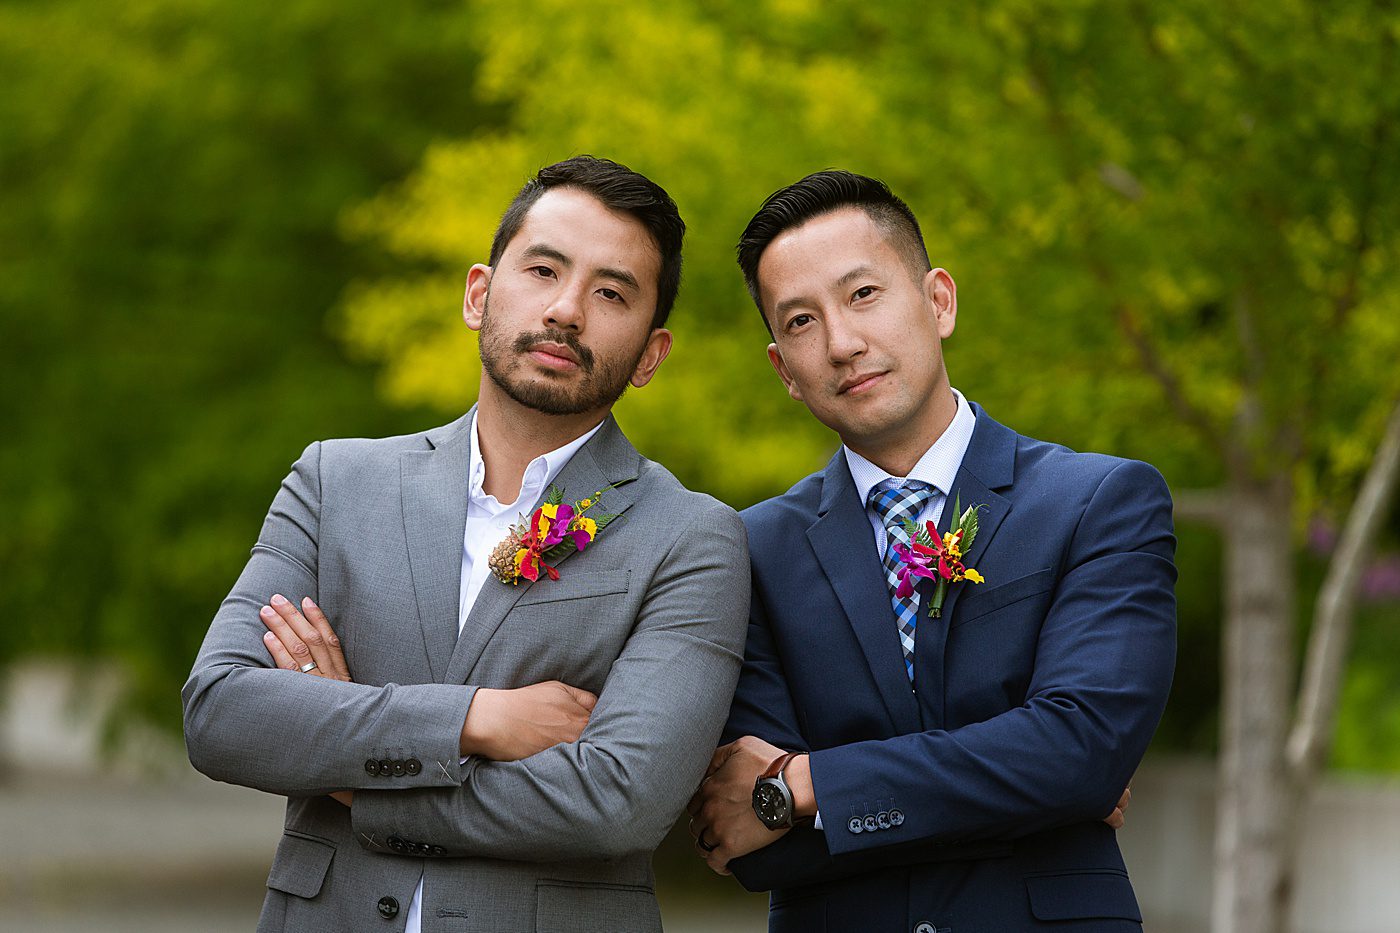 groomsmen wearing colorful boutonnieres